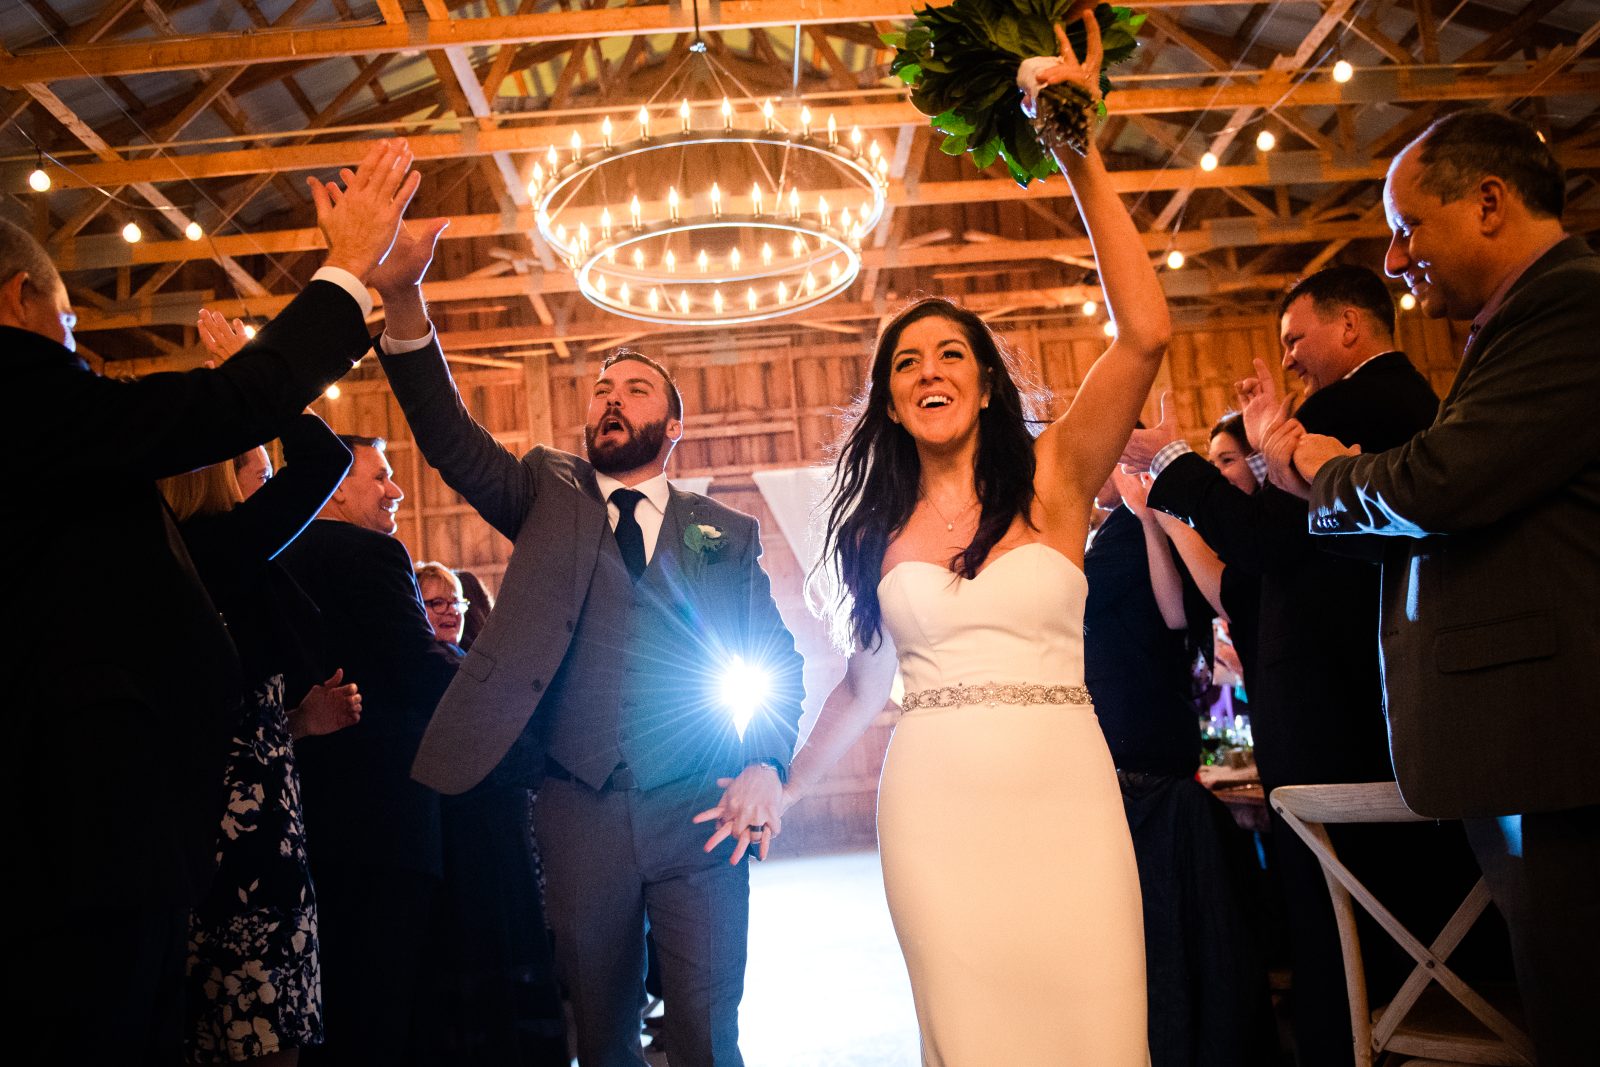 Bride and groom giving high-5’s while entering their wedding reception